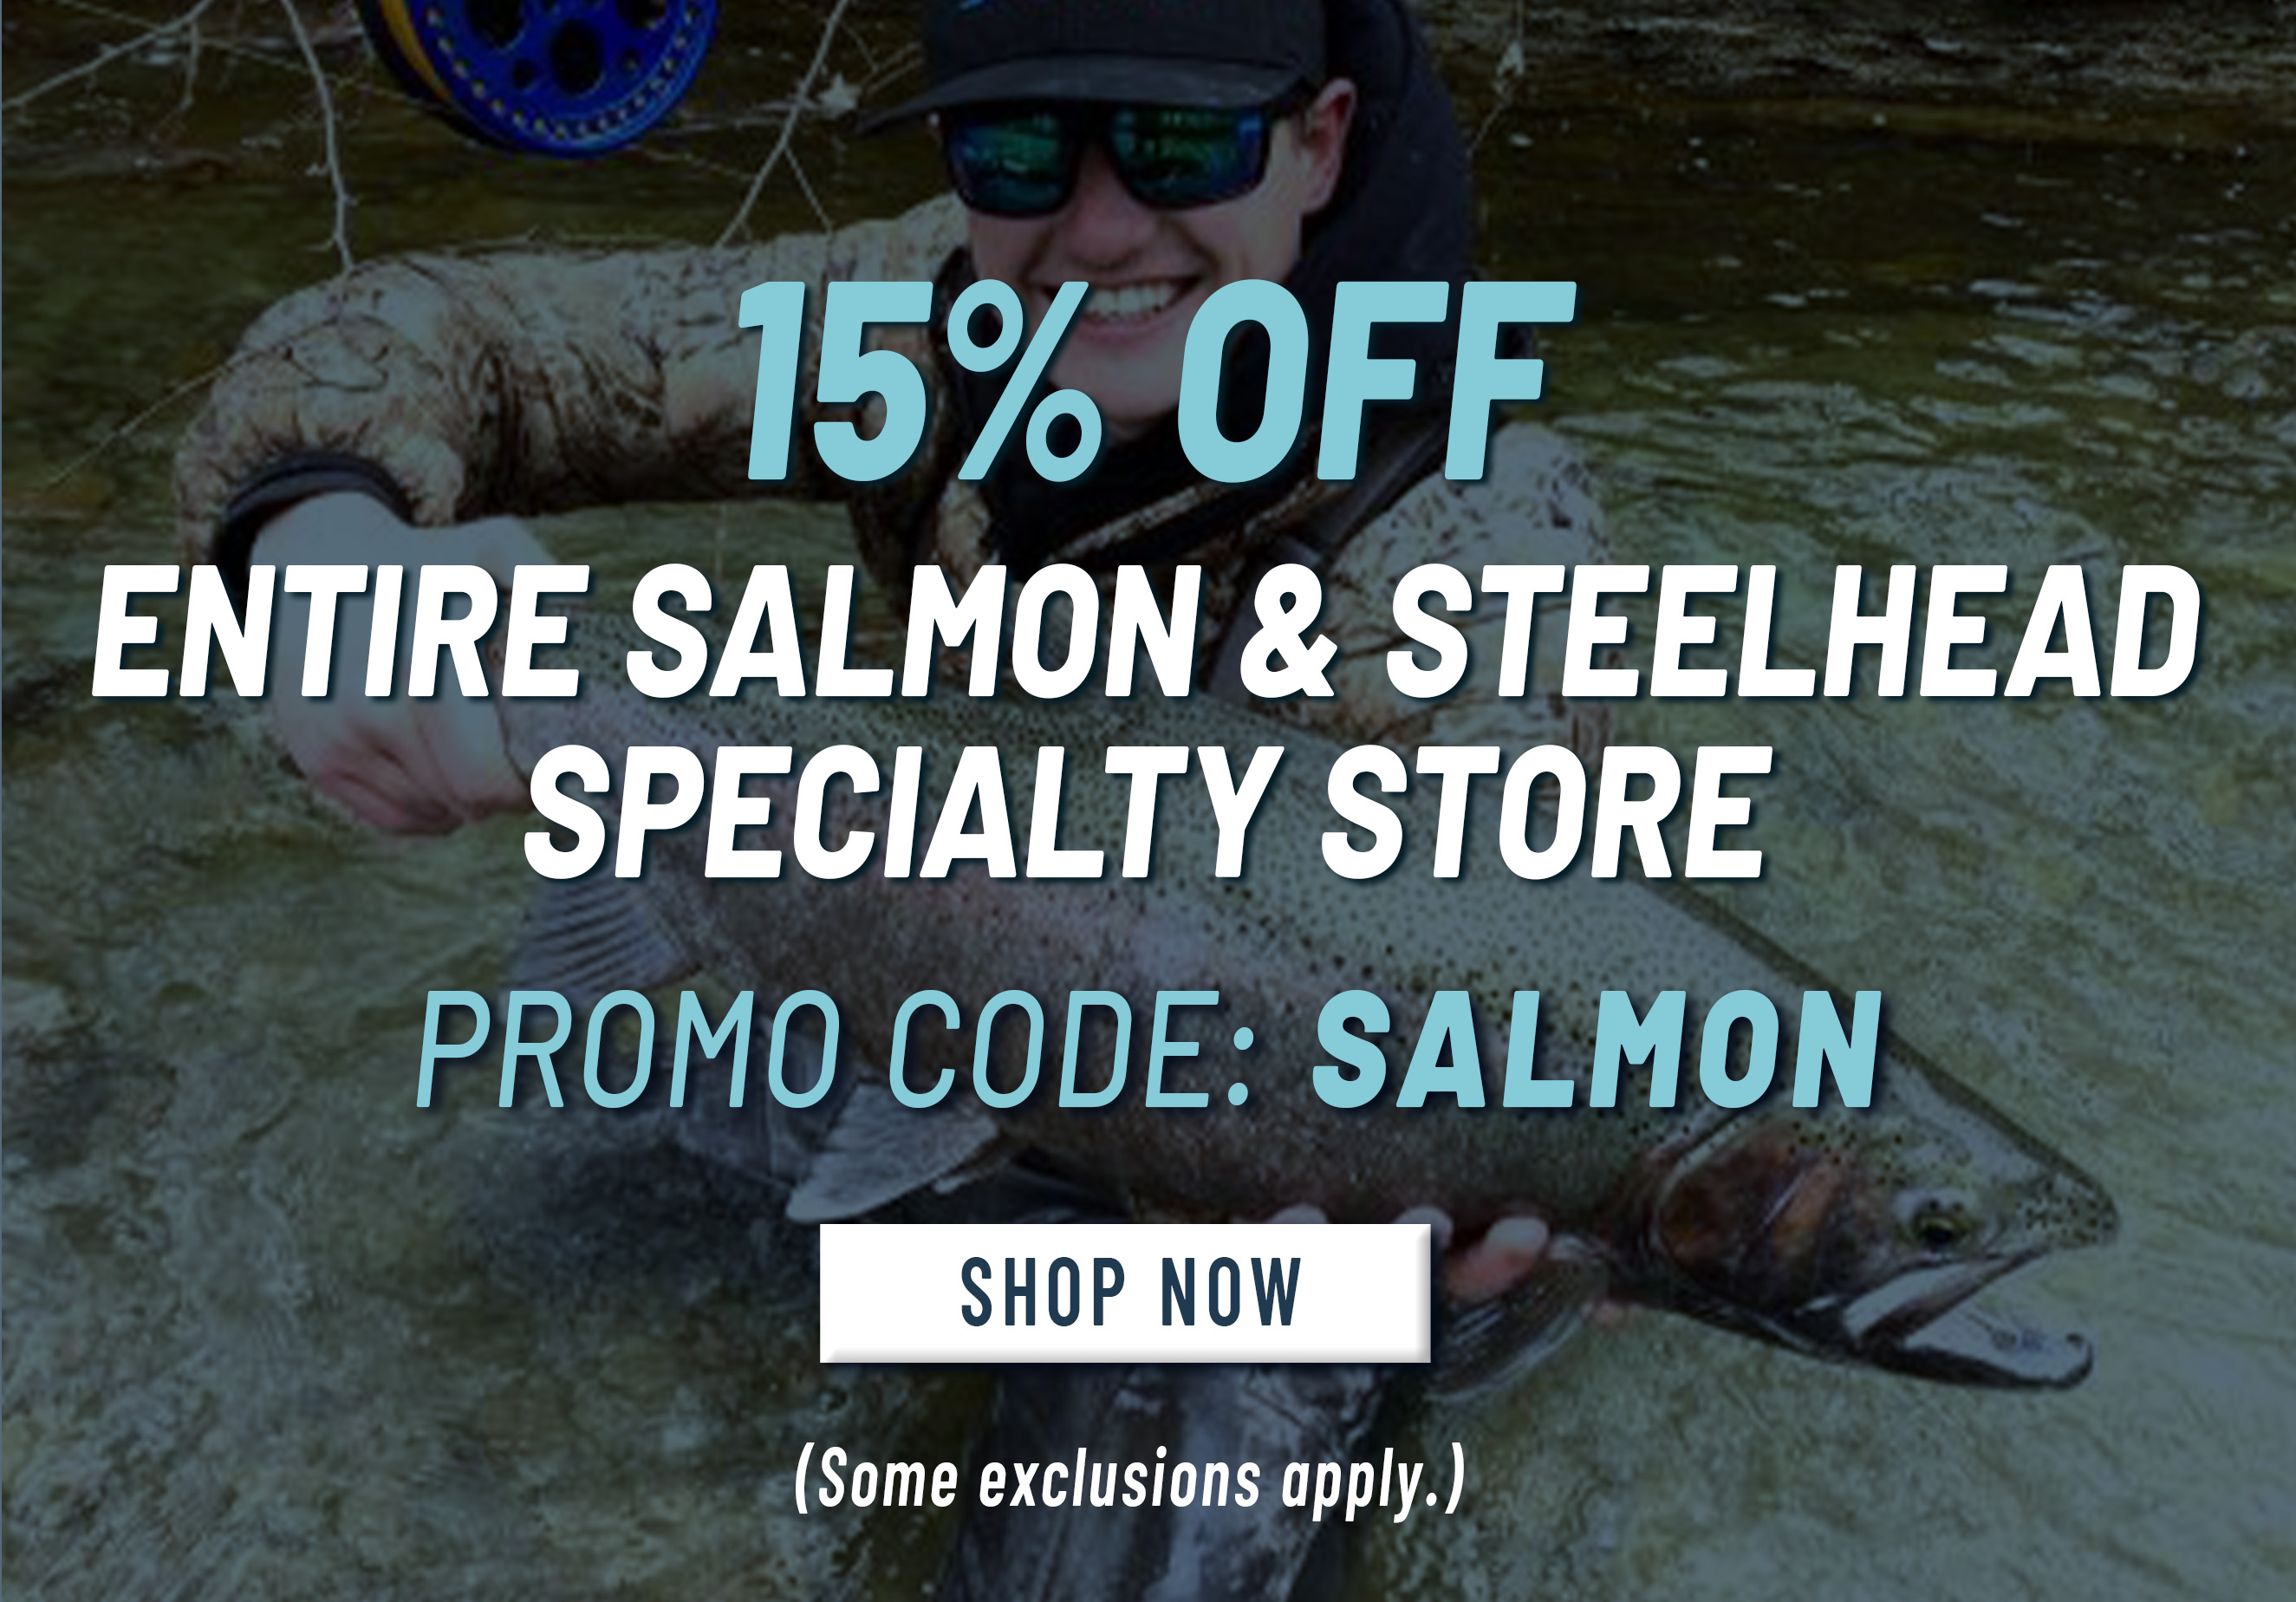 15% Off  Entire Salmon & Steelhead Specialty Store Promo Code: SALMON Shop Now (Some exclusions apply.)